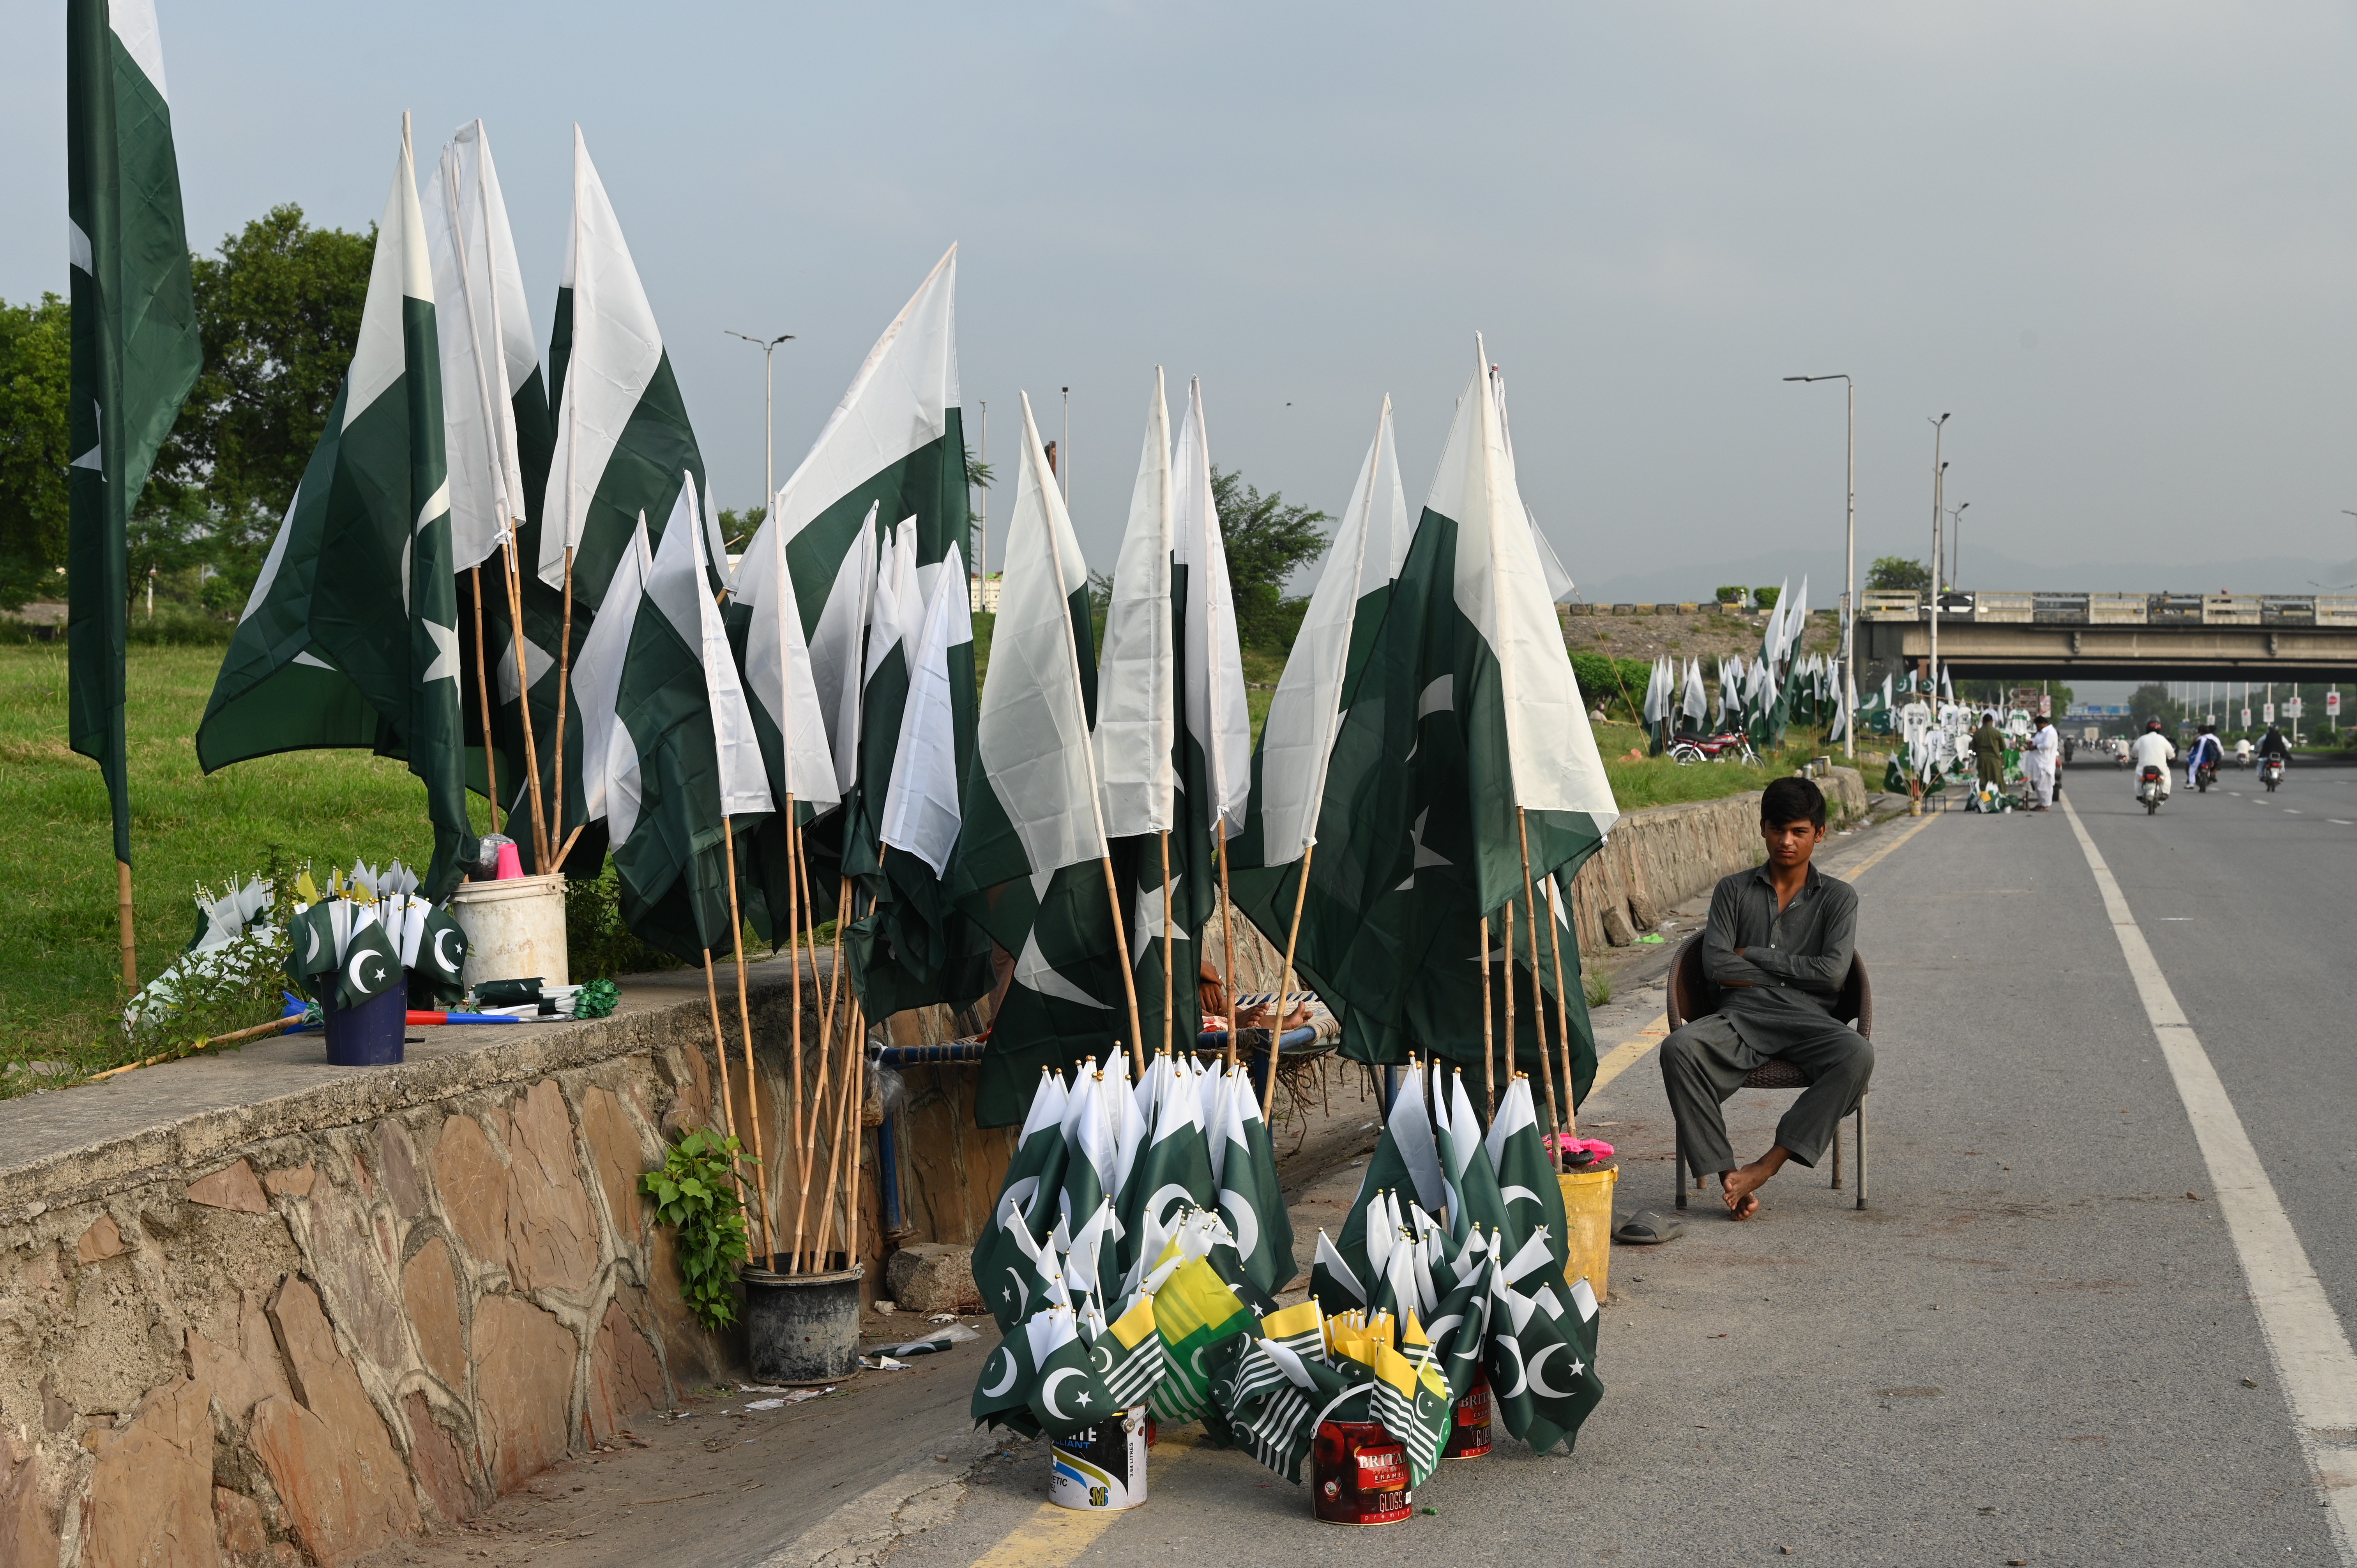 A boy set up stall selling national flags and badges of Pakistan and Kashmir in Islamabad to mark independence day